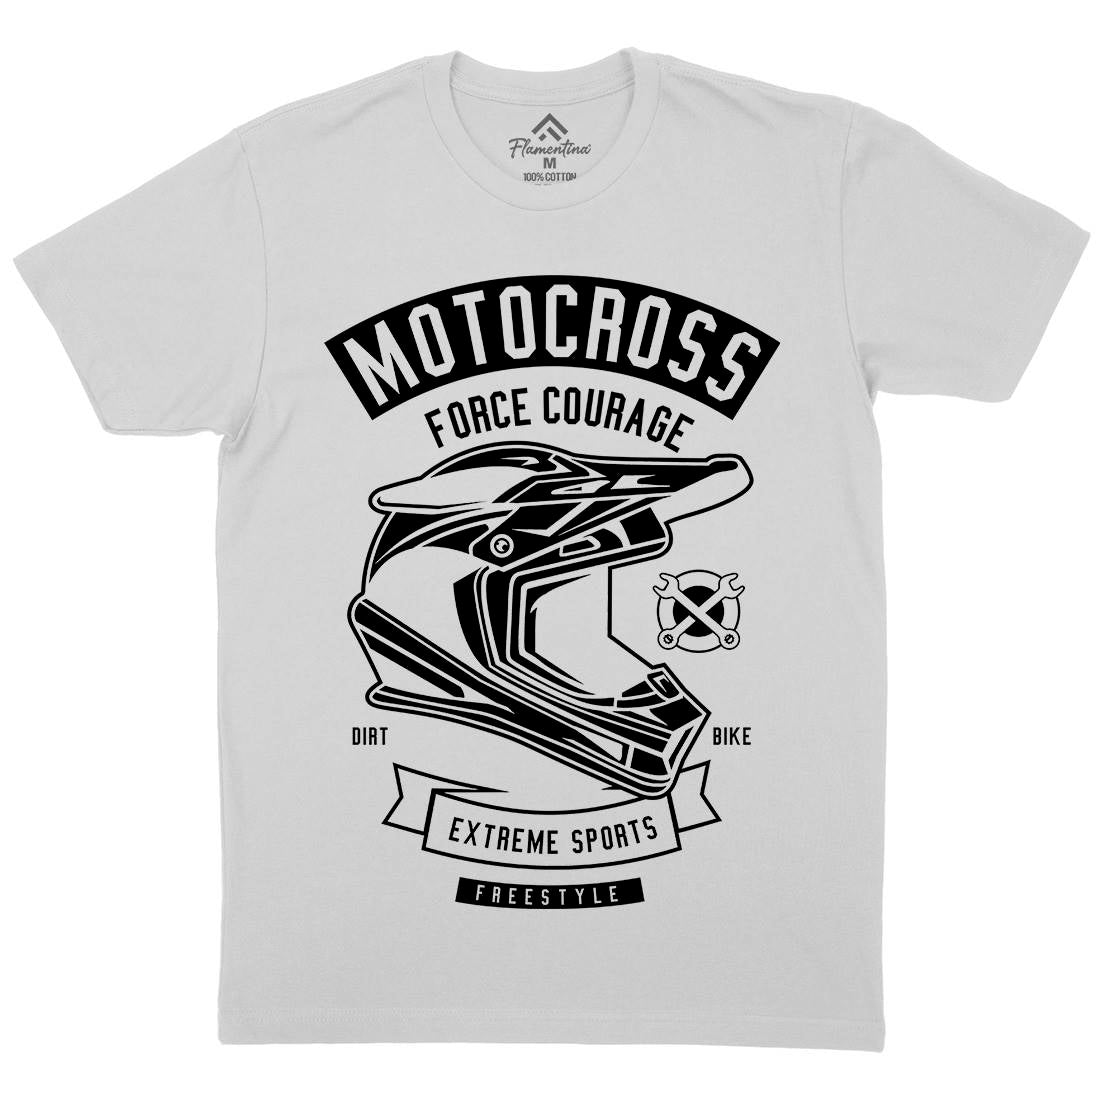 Motocross Force Courage Mens Crew Neck T-Shirt Motorcycles B576